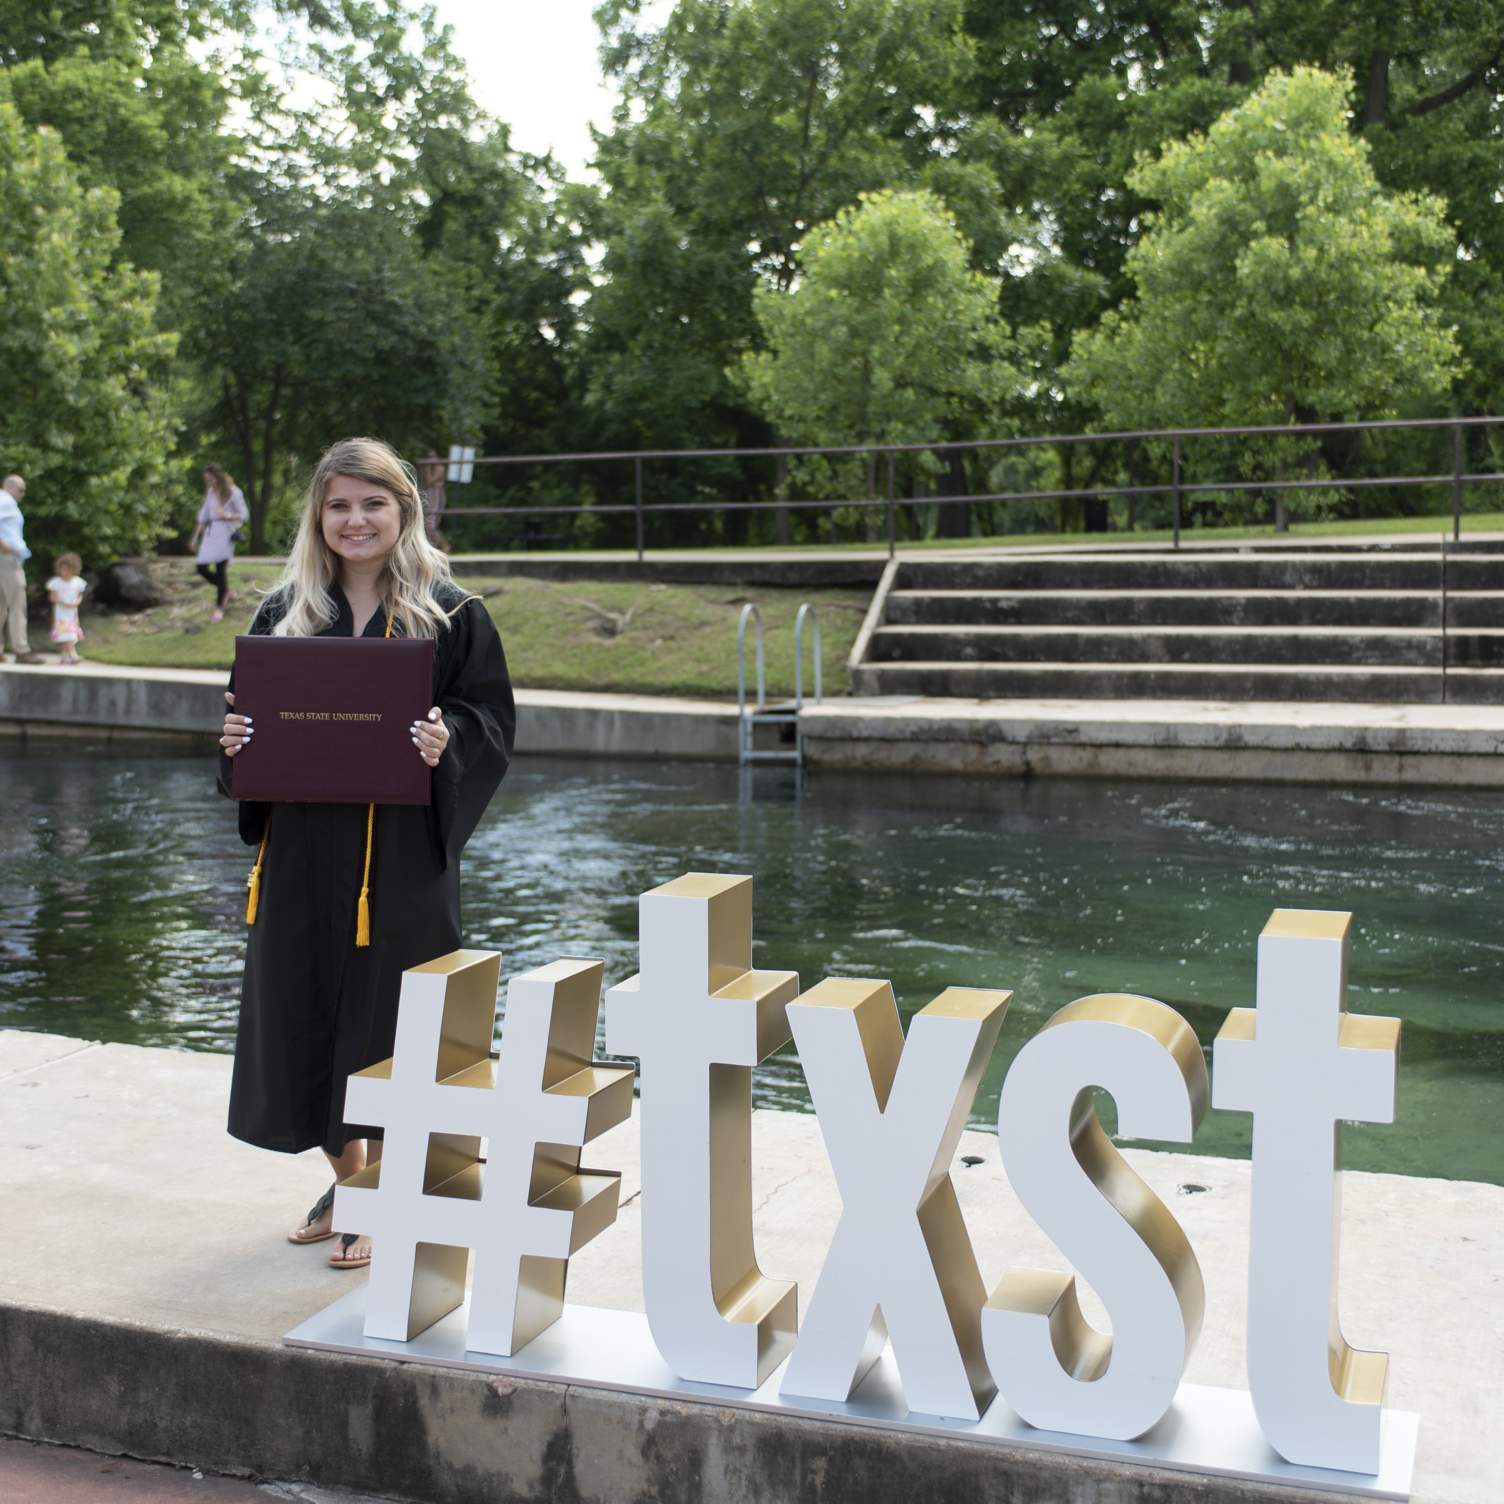 #txst graduate with diploma